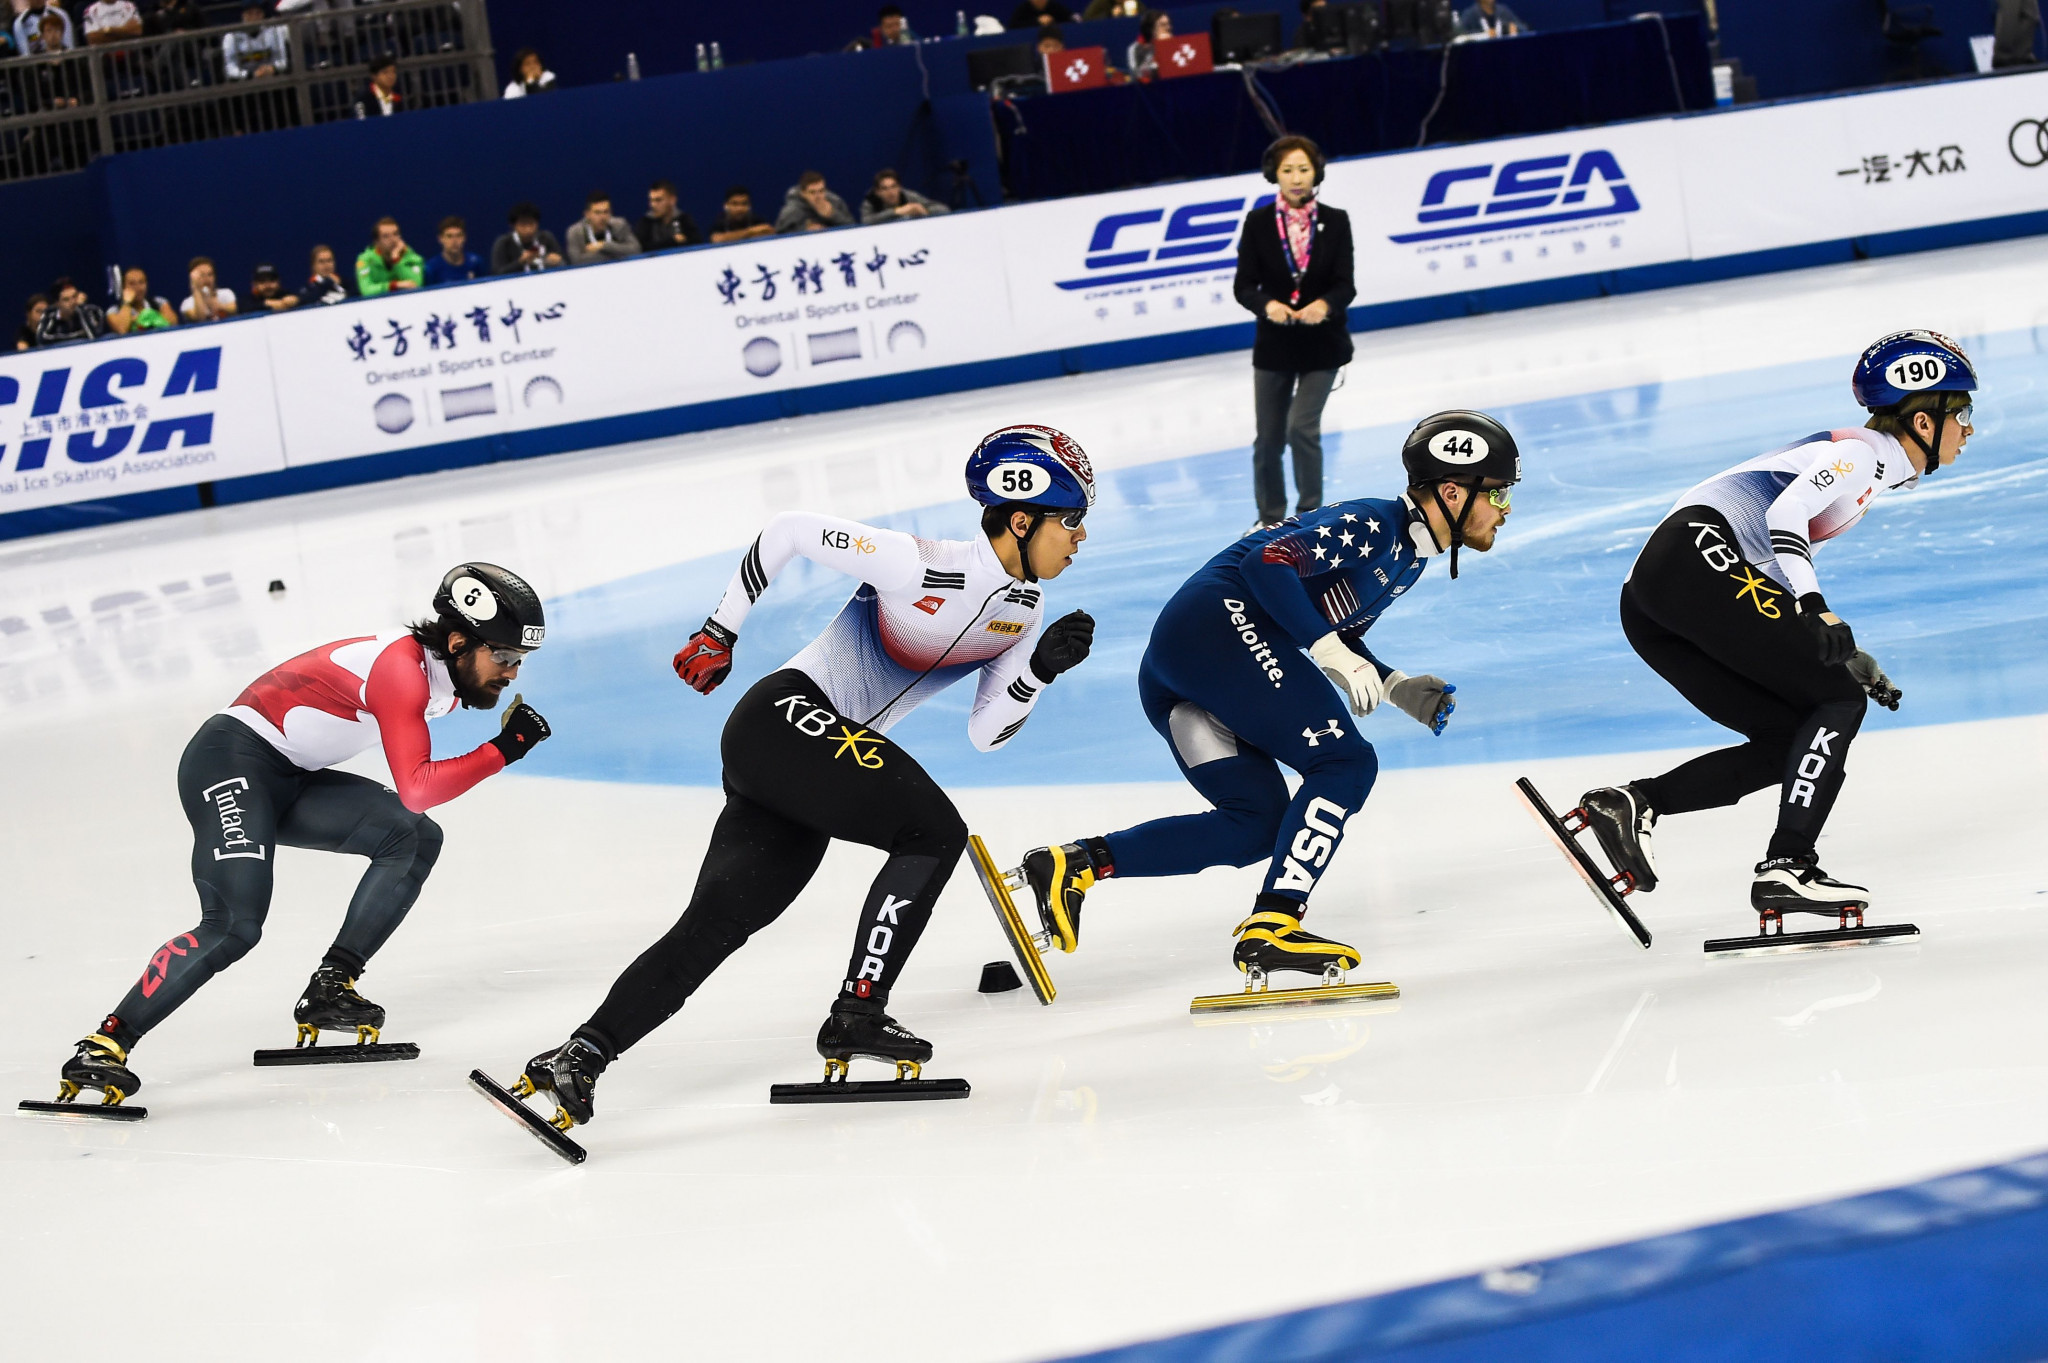 Hwang Dae-heon, second left, is among the South Korean skaters aiming for victory in Seoul ©Getty Images